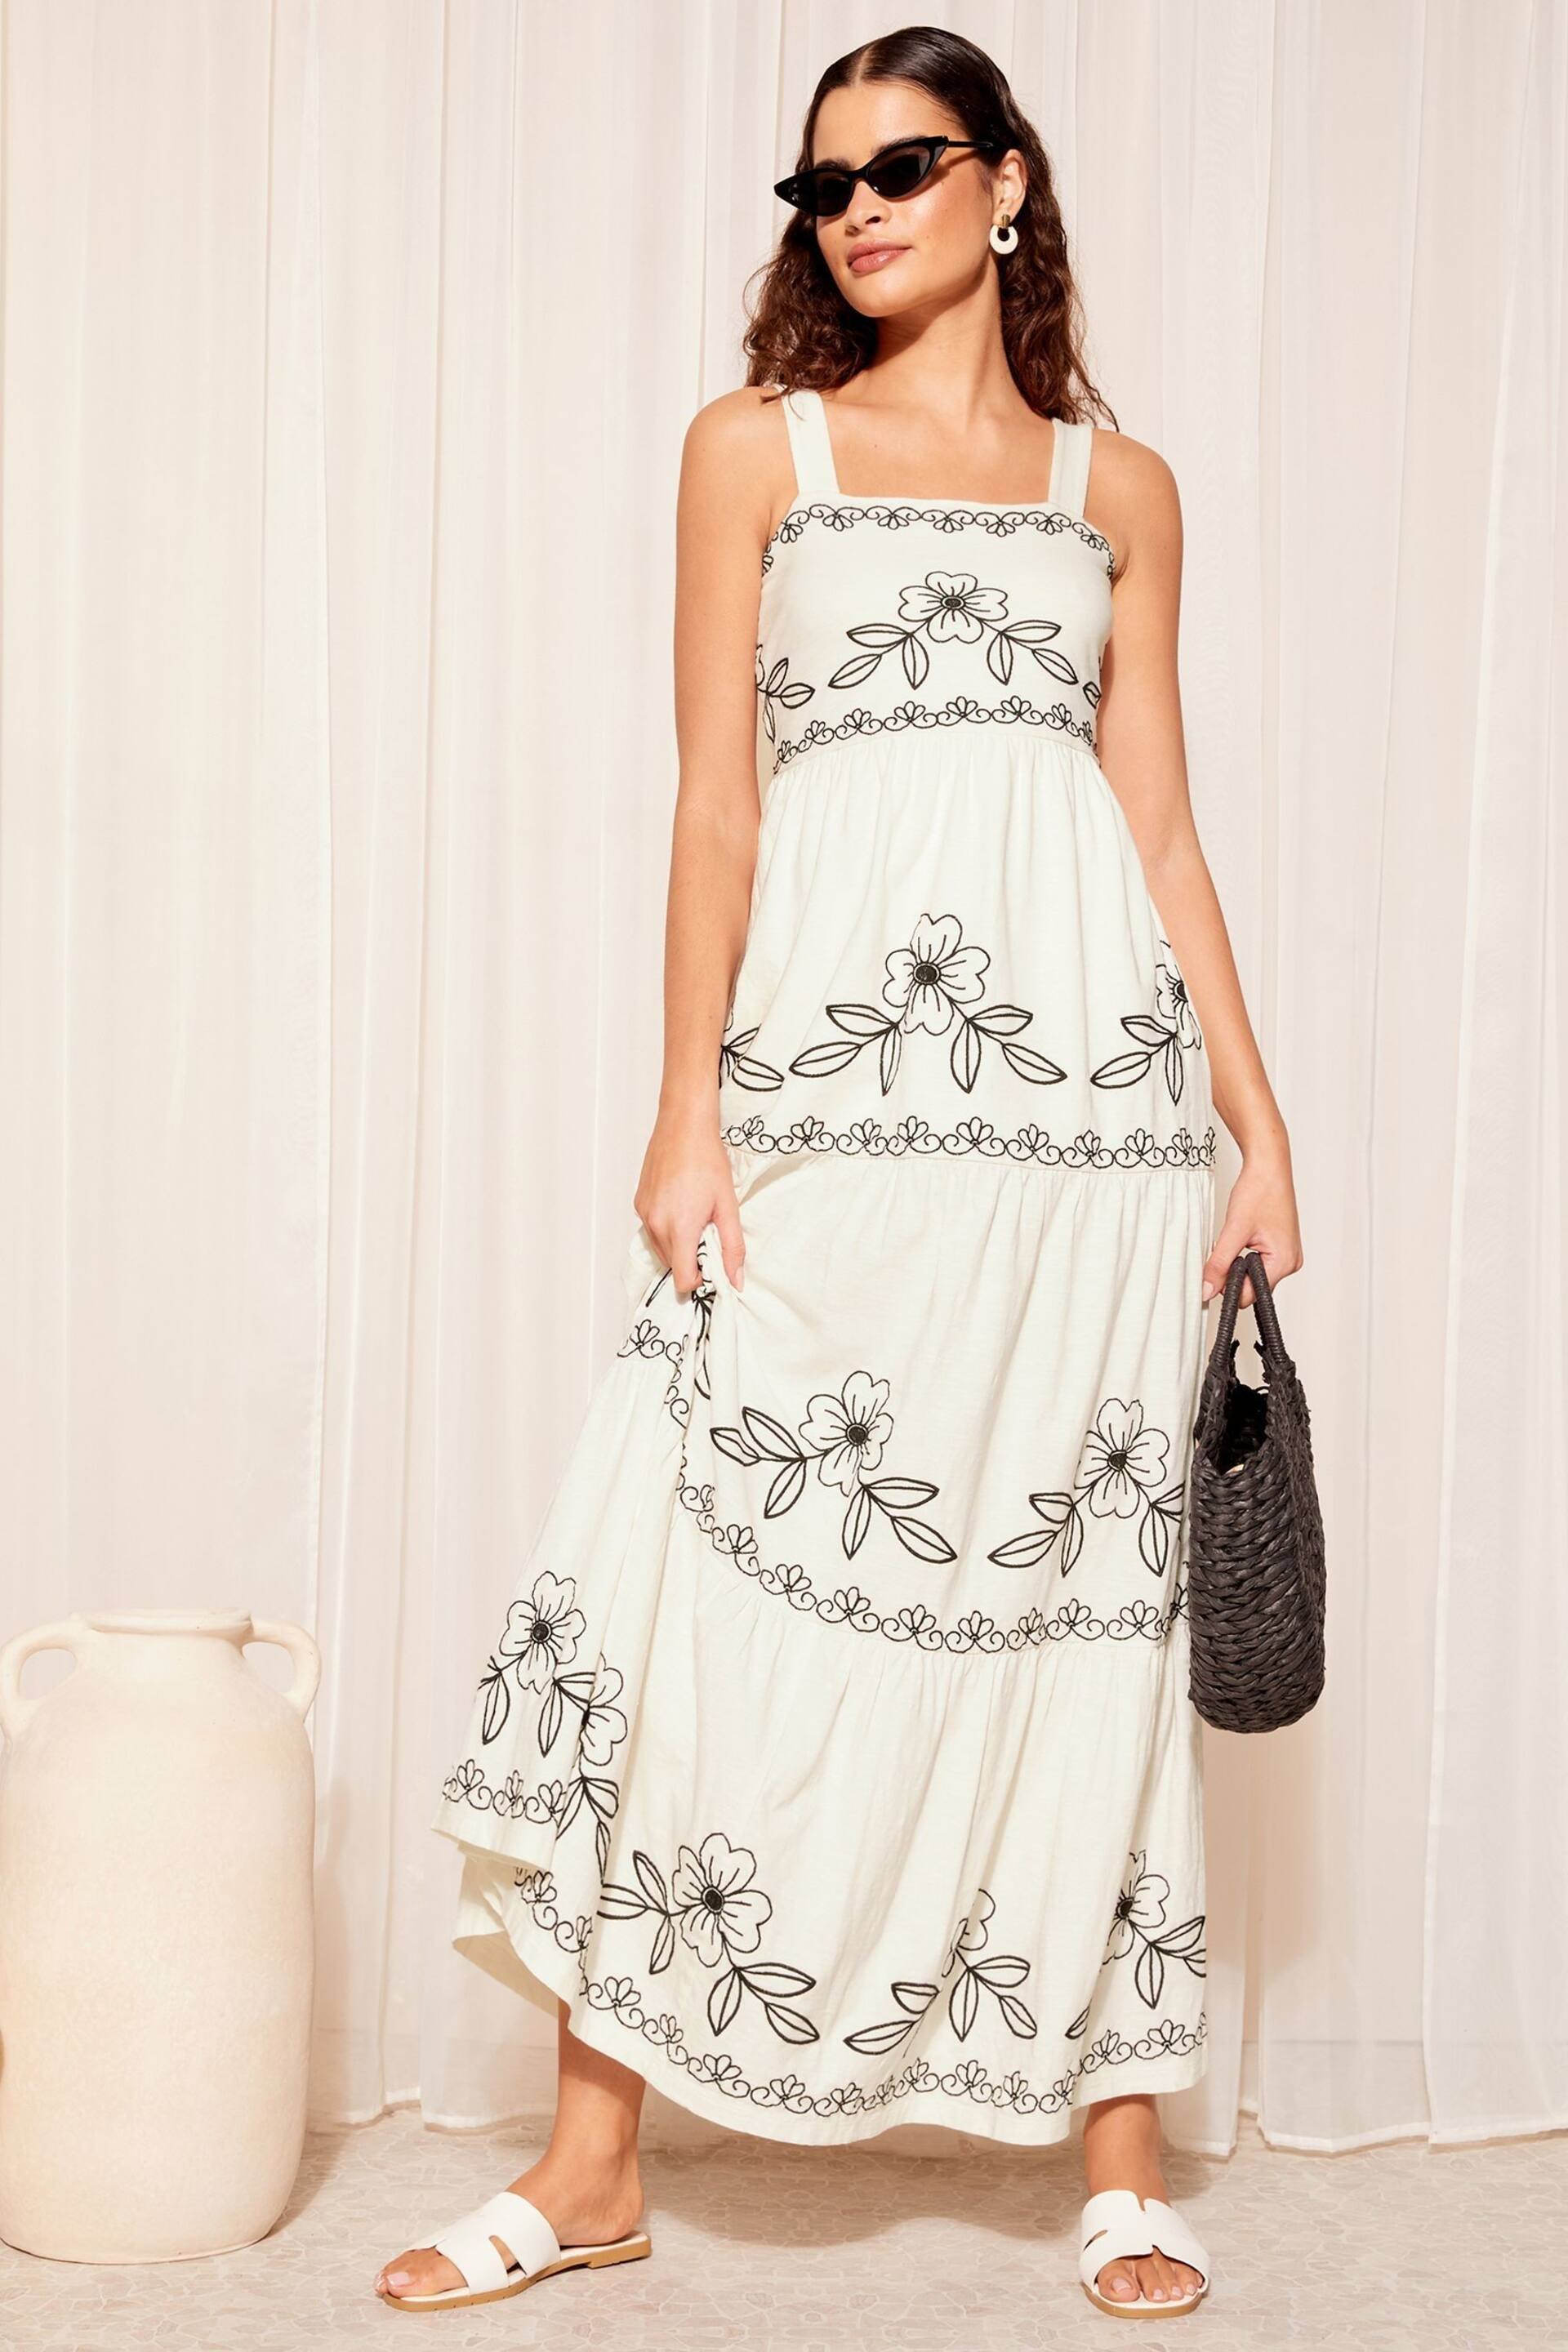 Friends Like These Ivory White Embroidered Tiered Strappy Maxi Dress - Image 3 of 4